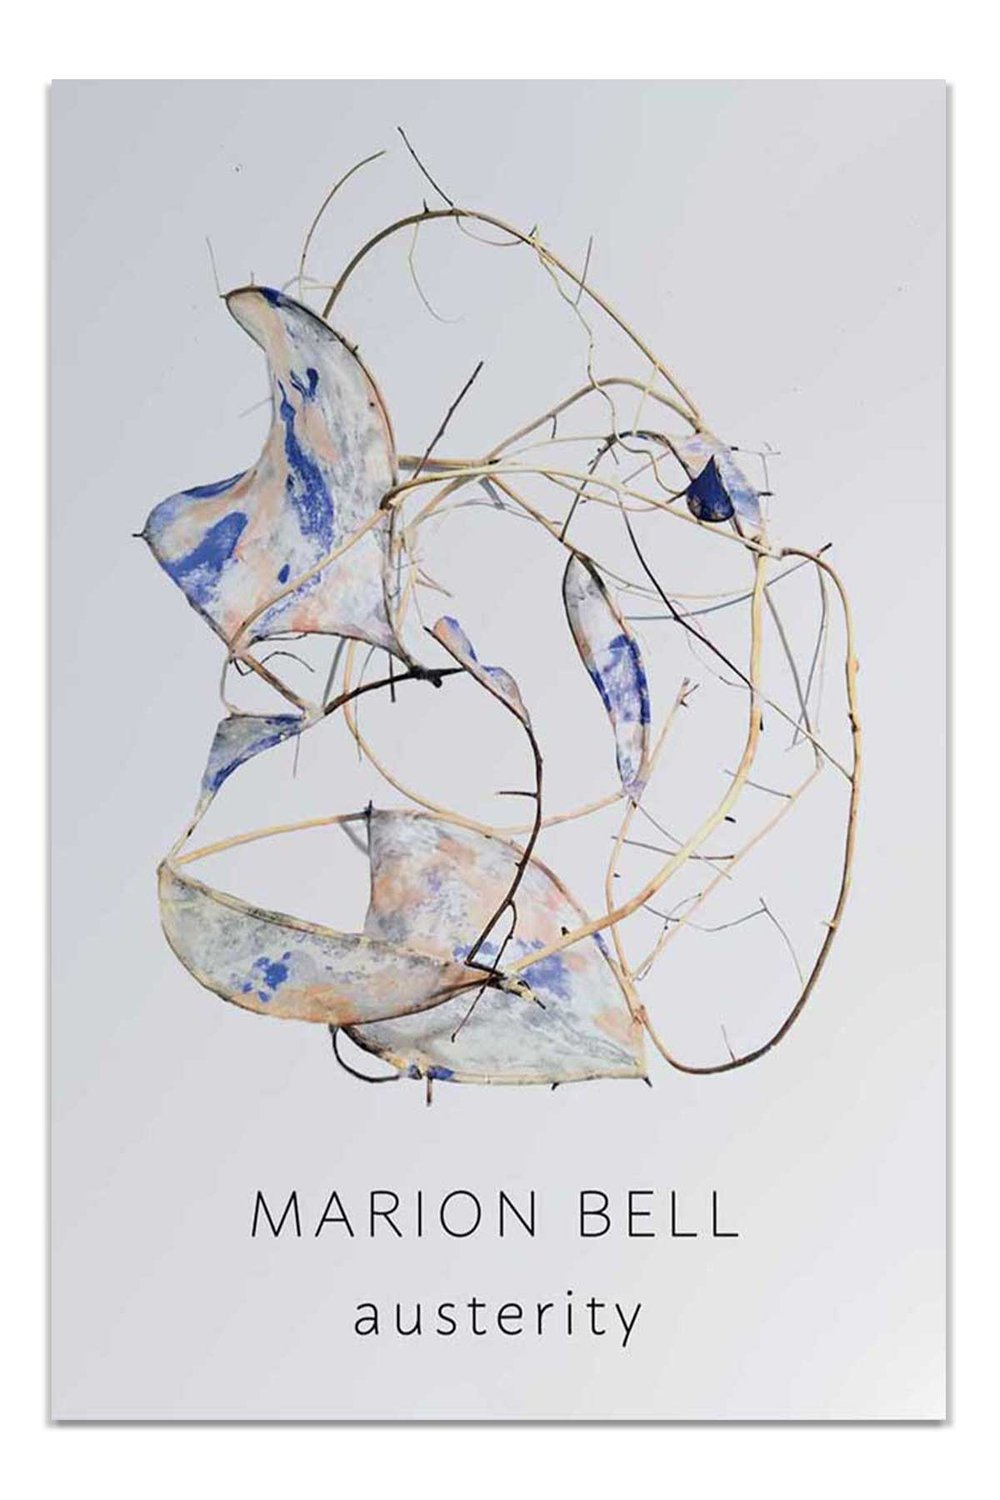 Austerity by Marion Bell